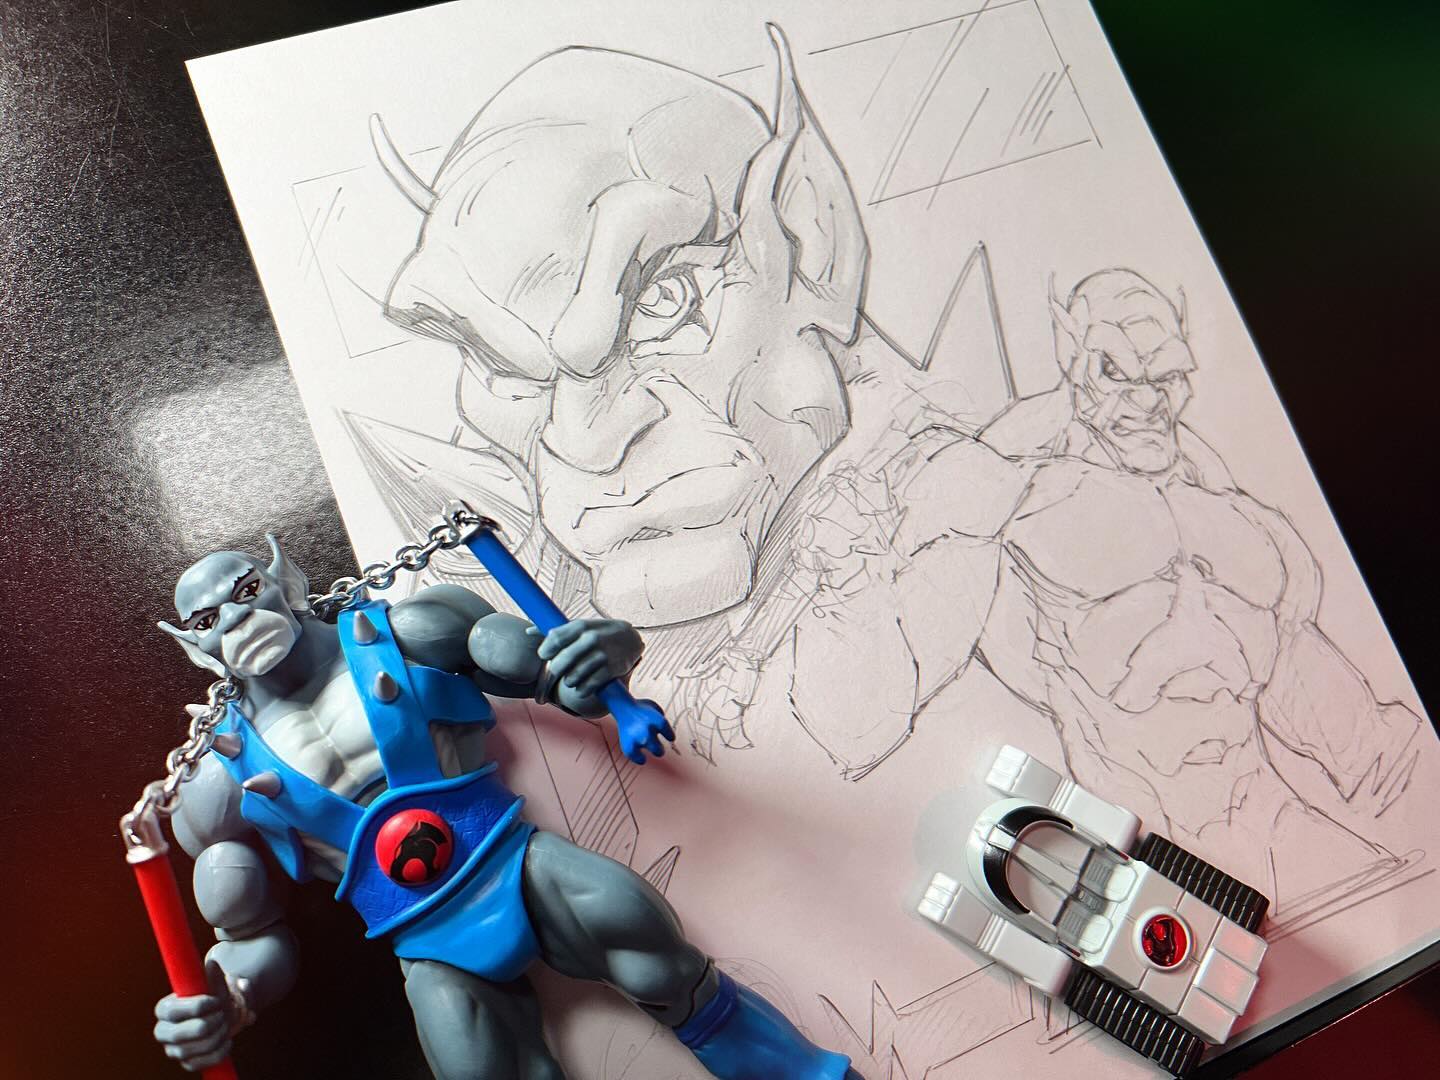 More vids up on my YouTube channel. Direct link in my profile.

#thundercats #drawing